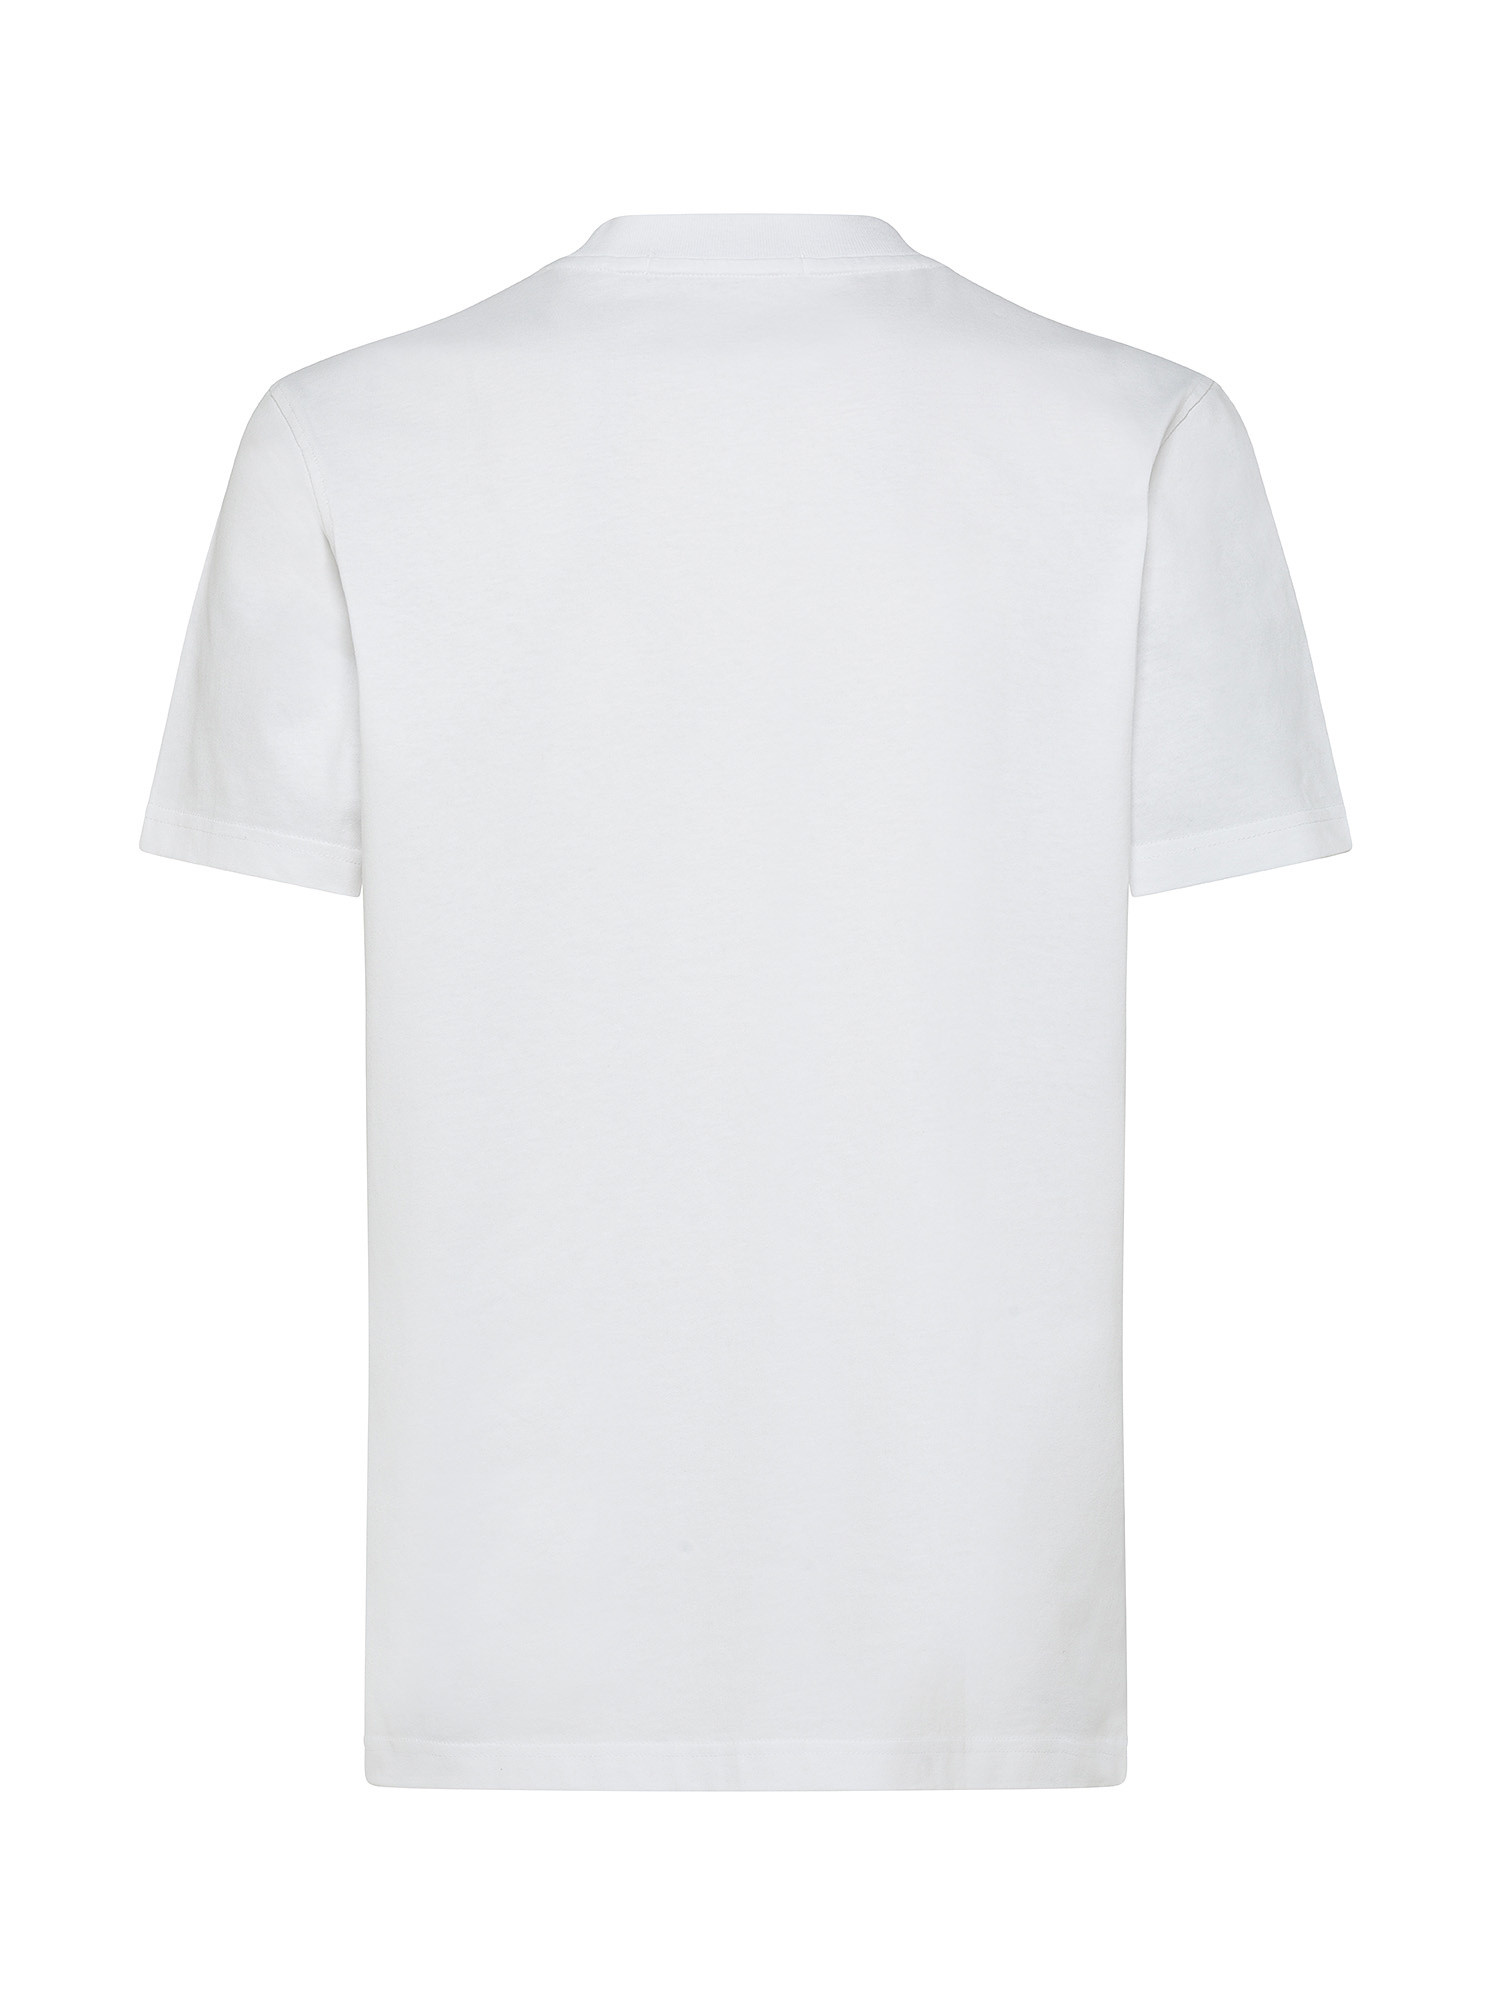 Calvin Klein Jeans - T-shirt in cotone riciclato con logo, Bianco, large image number 1